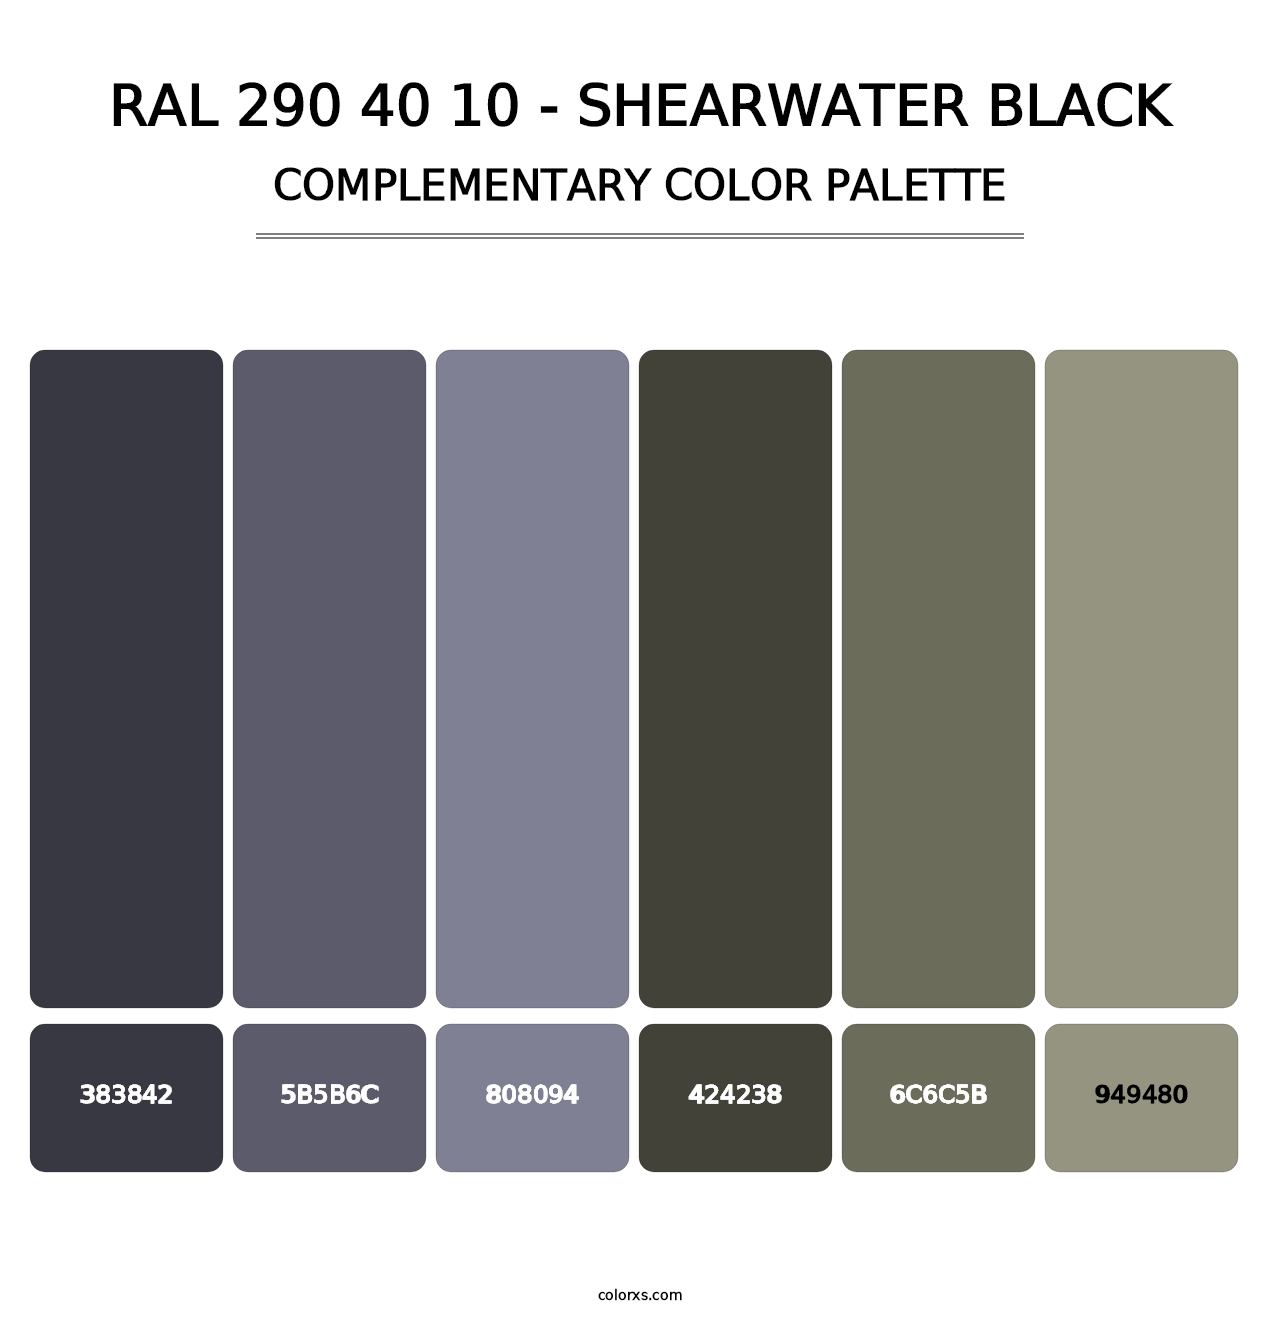 RAL 290 40 10 - Shearwater Black - Complementary Color Palette